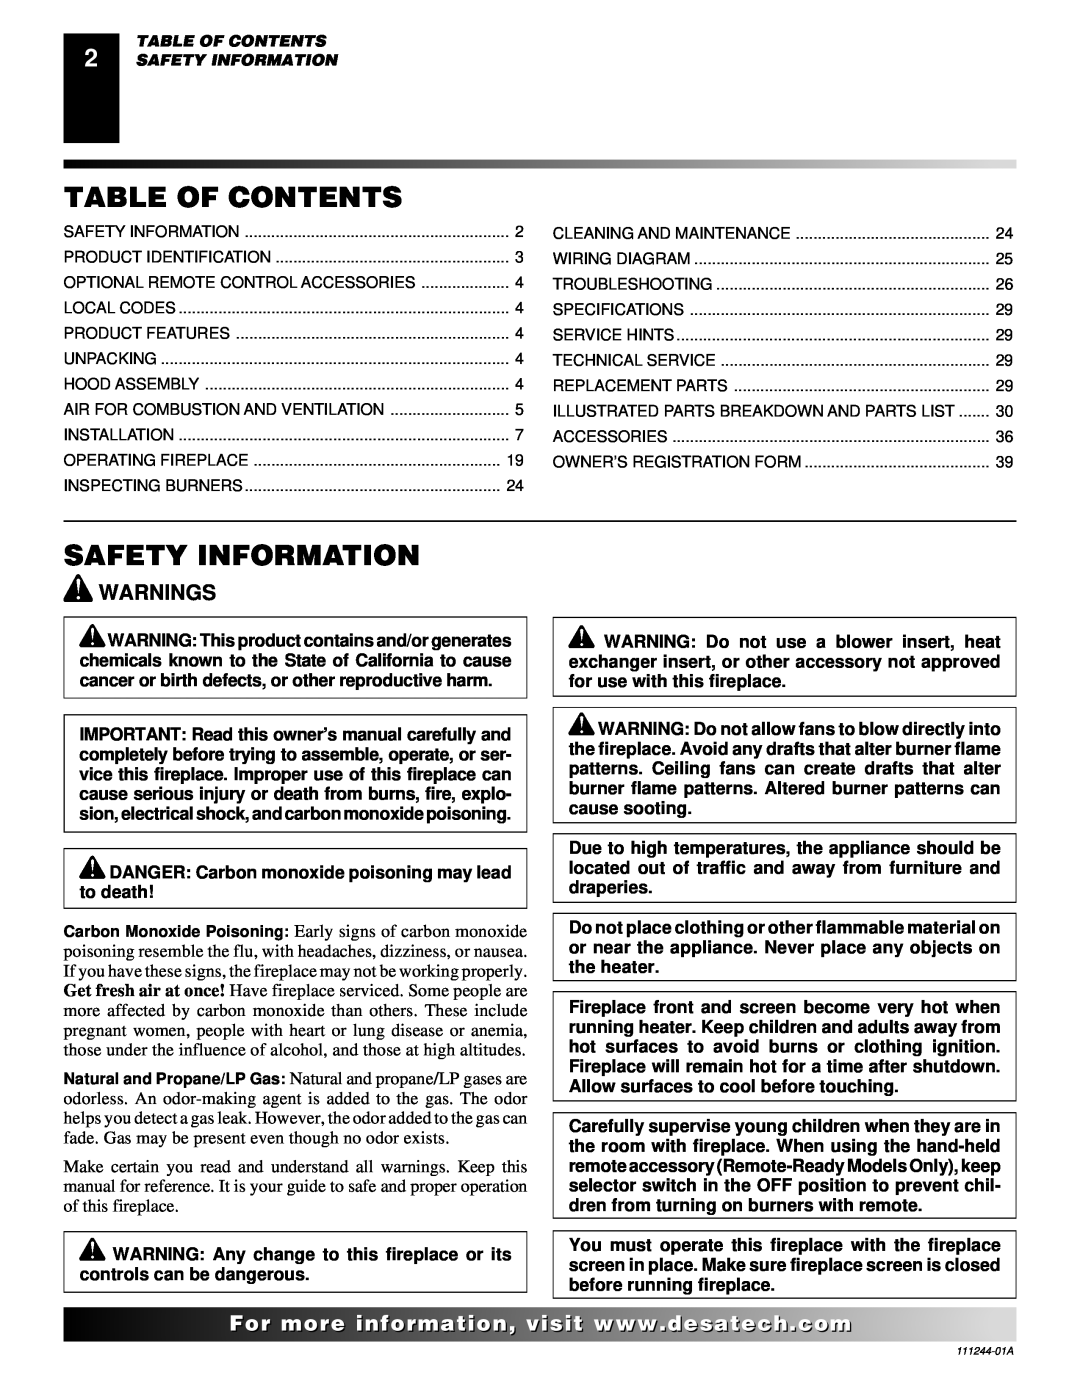 Desa FDCFTN, CDCFTN, CDCFTP, FDCFRP, FDCFTP, FDCFRN, VDCFTP, VDCFRP Table Of Contents, Safety Information, Warnings, For..com 